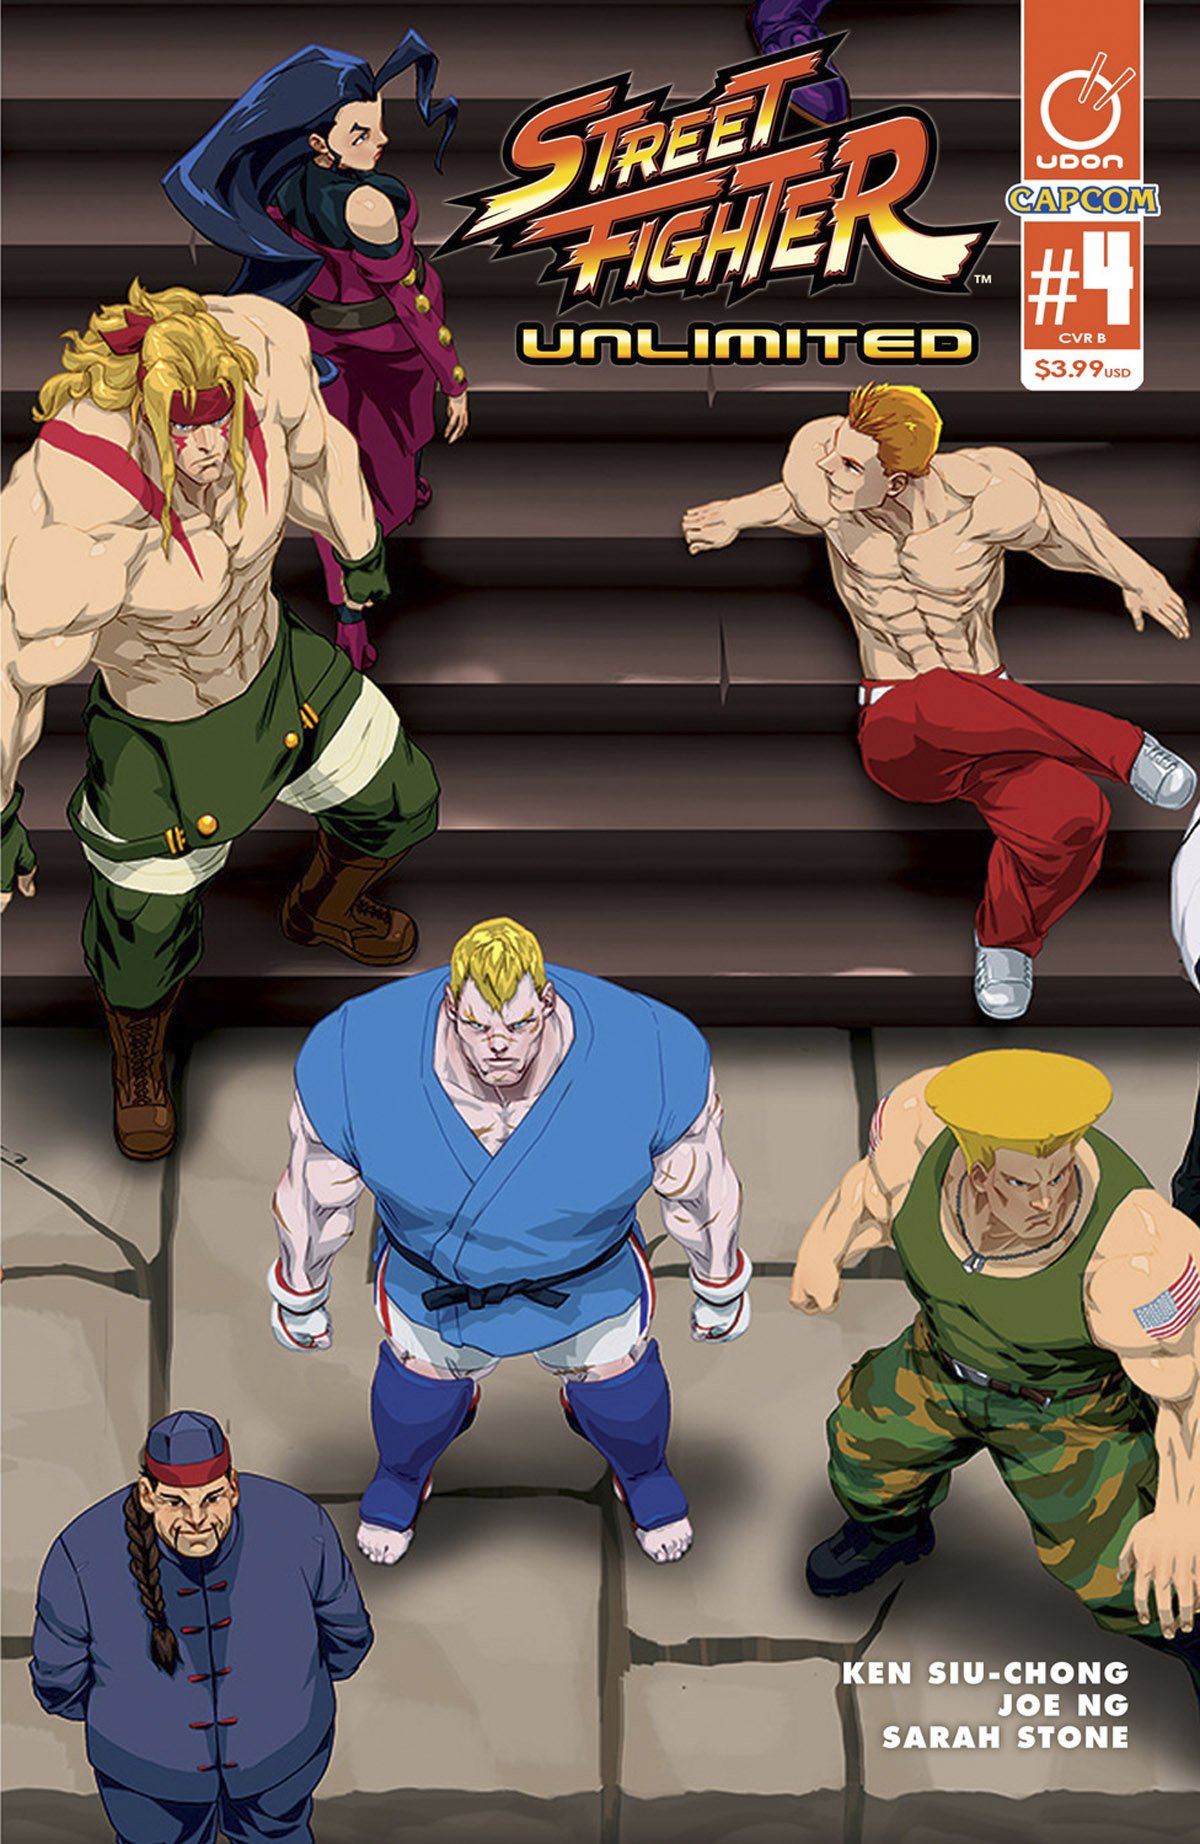 Street Fighter Unlimited 004 (March 2016) (cover B)